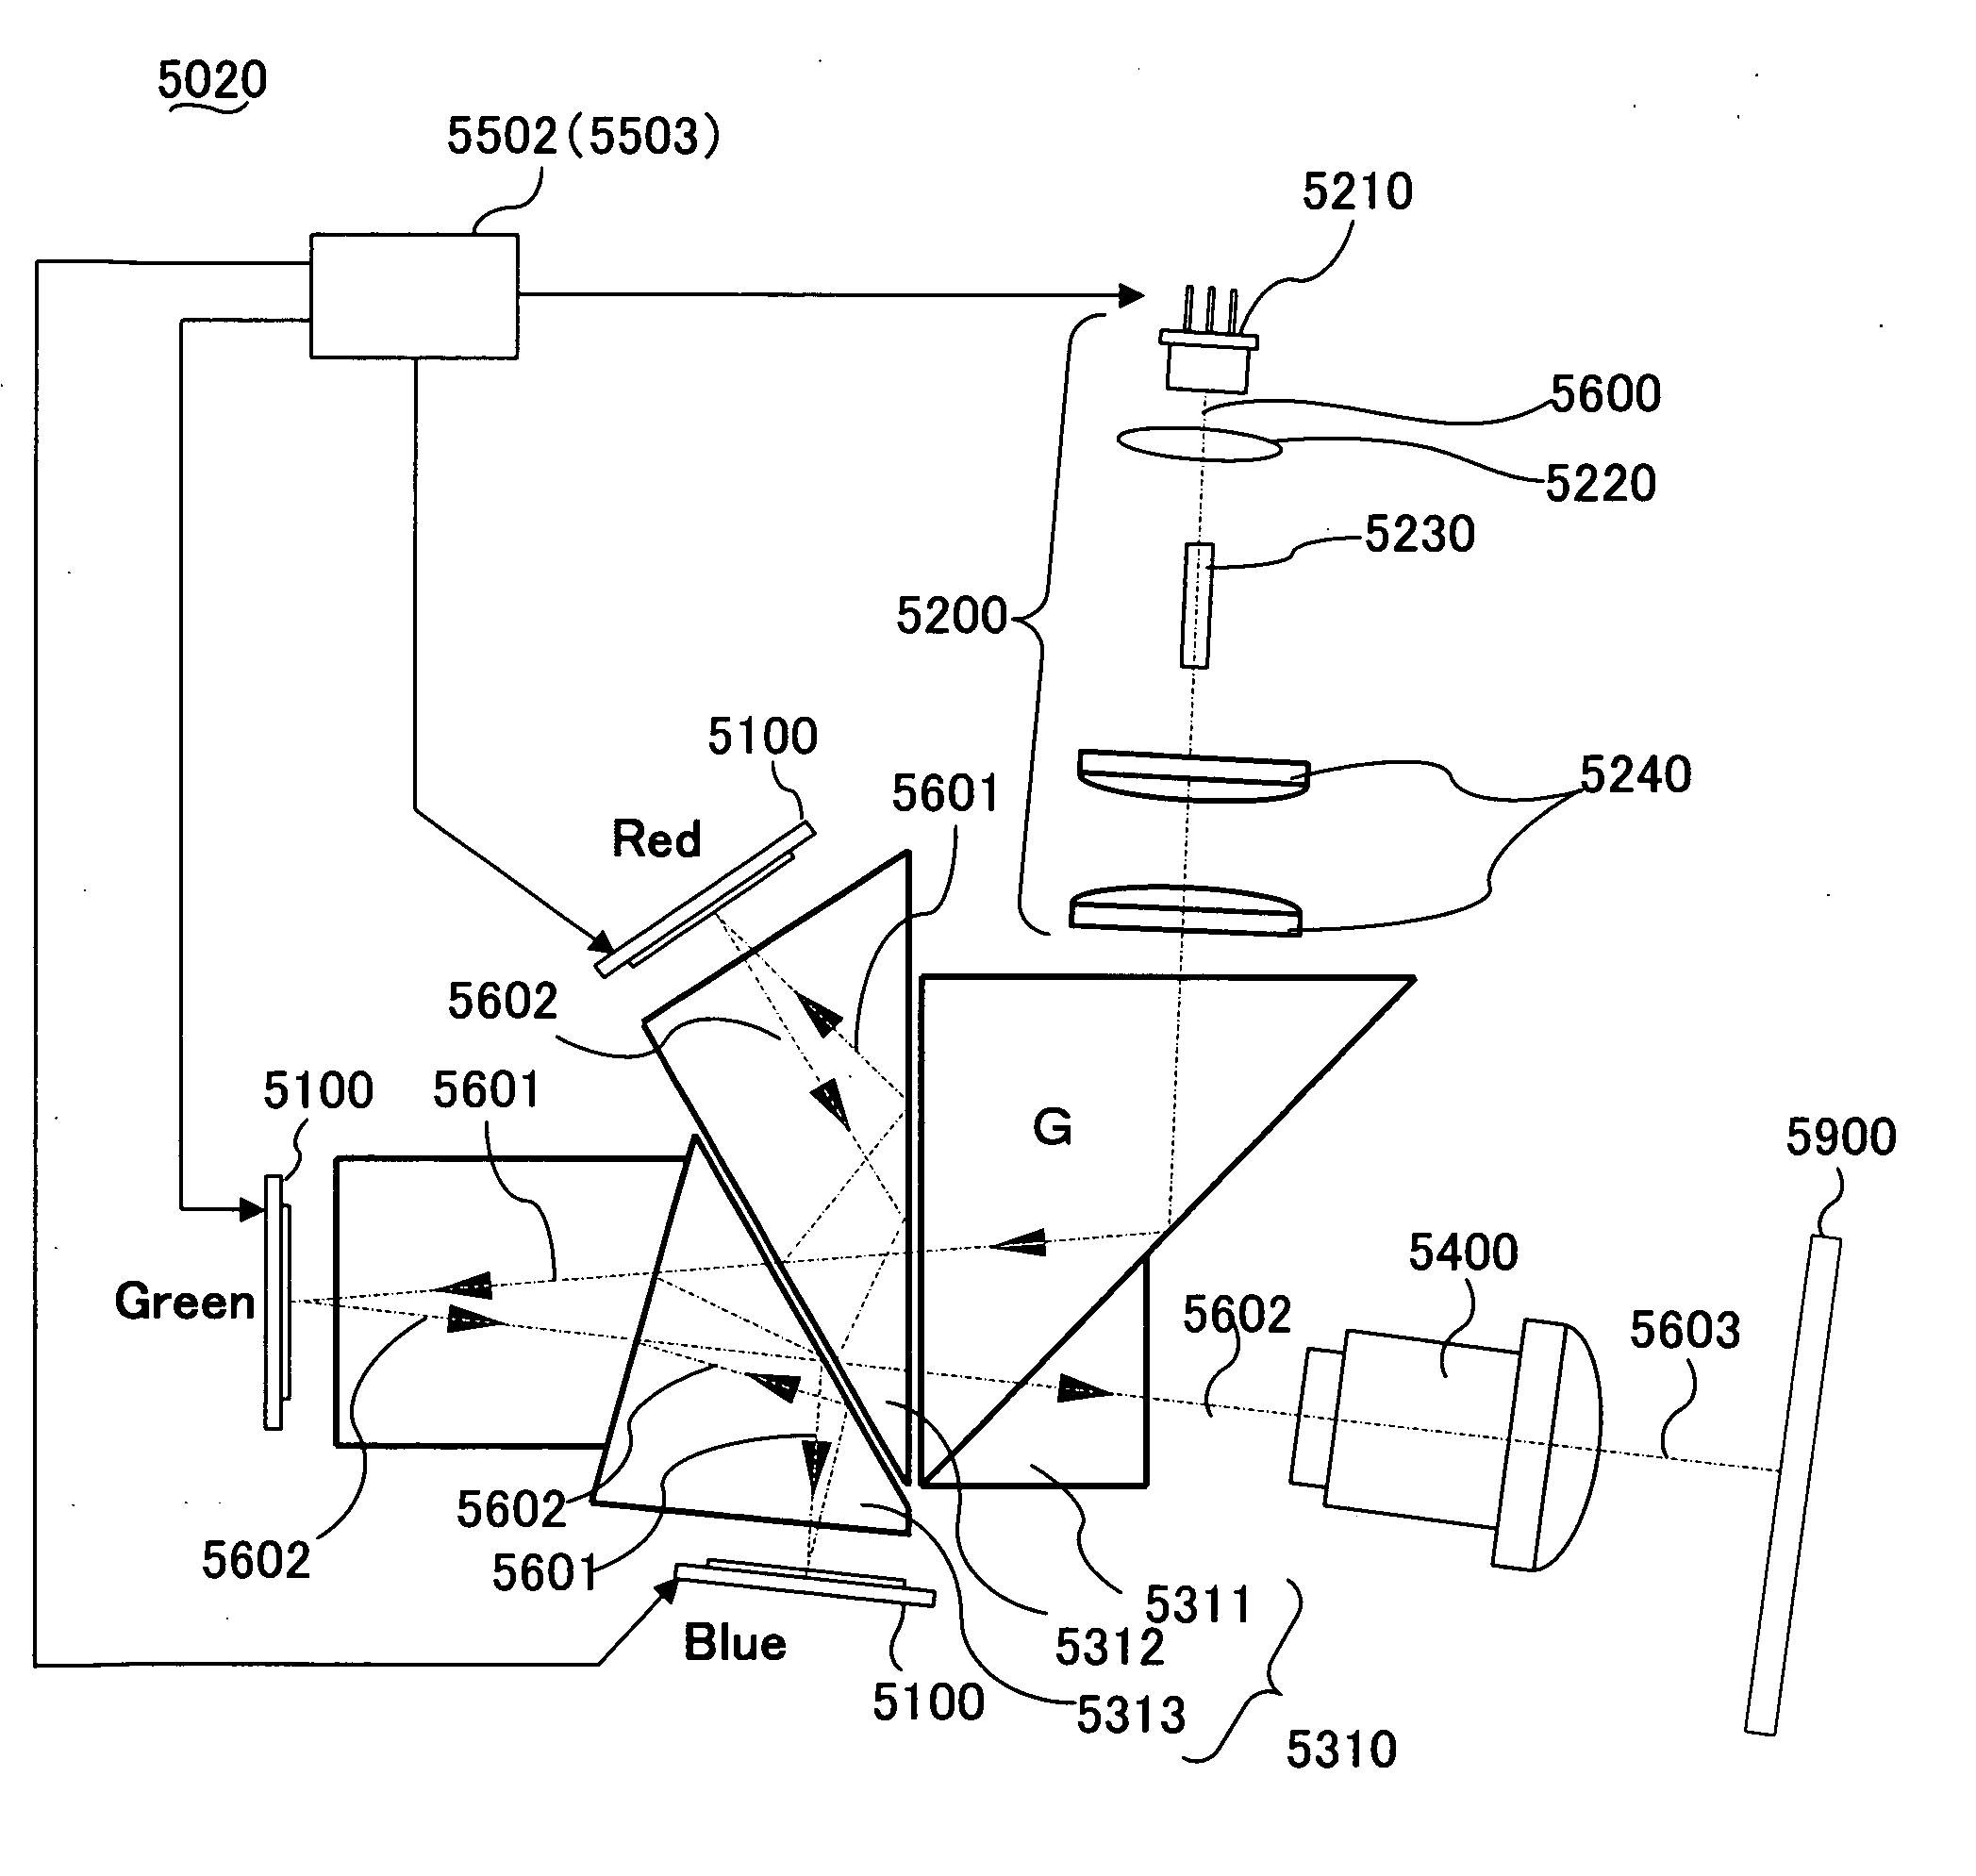 Projection display system with varying light source